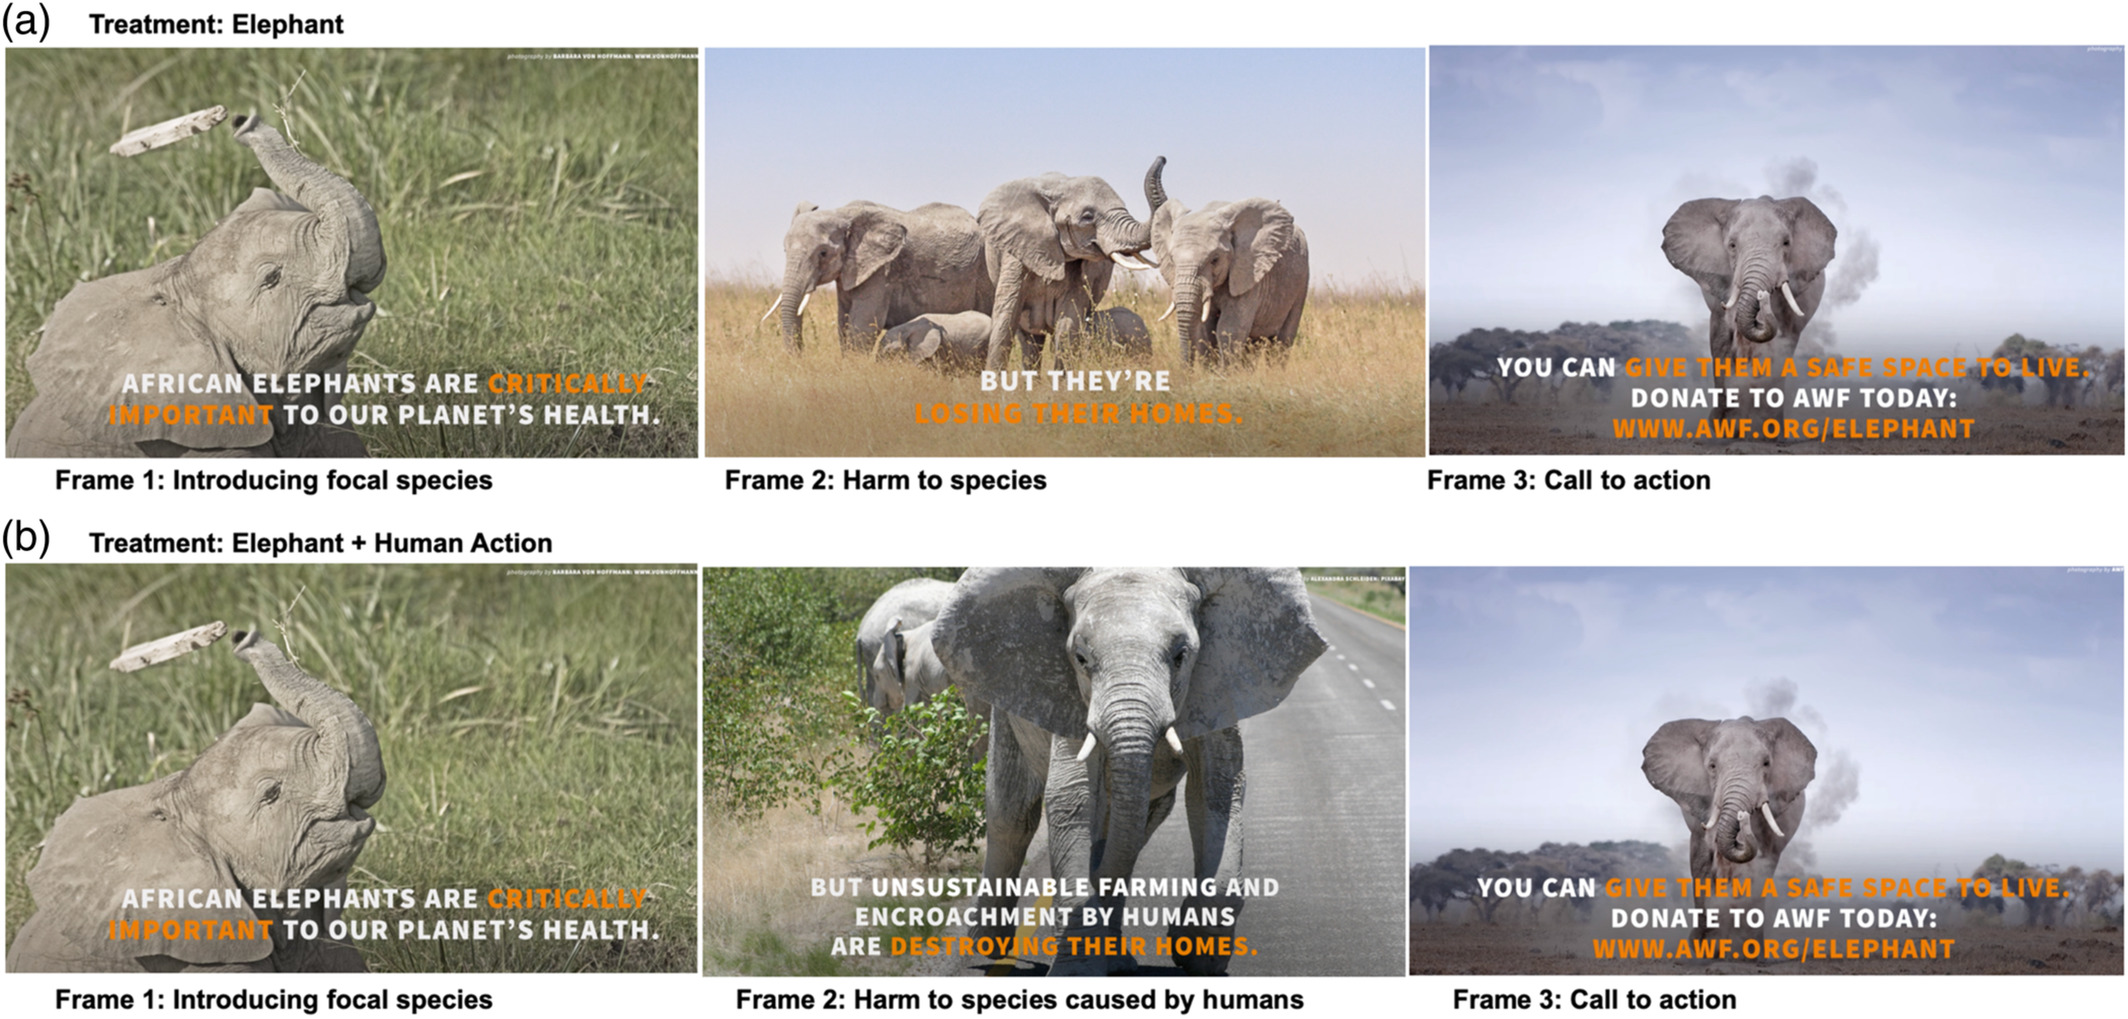 How storytelling impacts engagement with wildlife conservation adverts